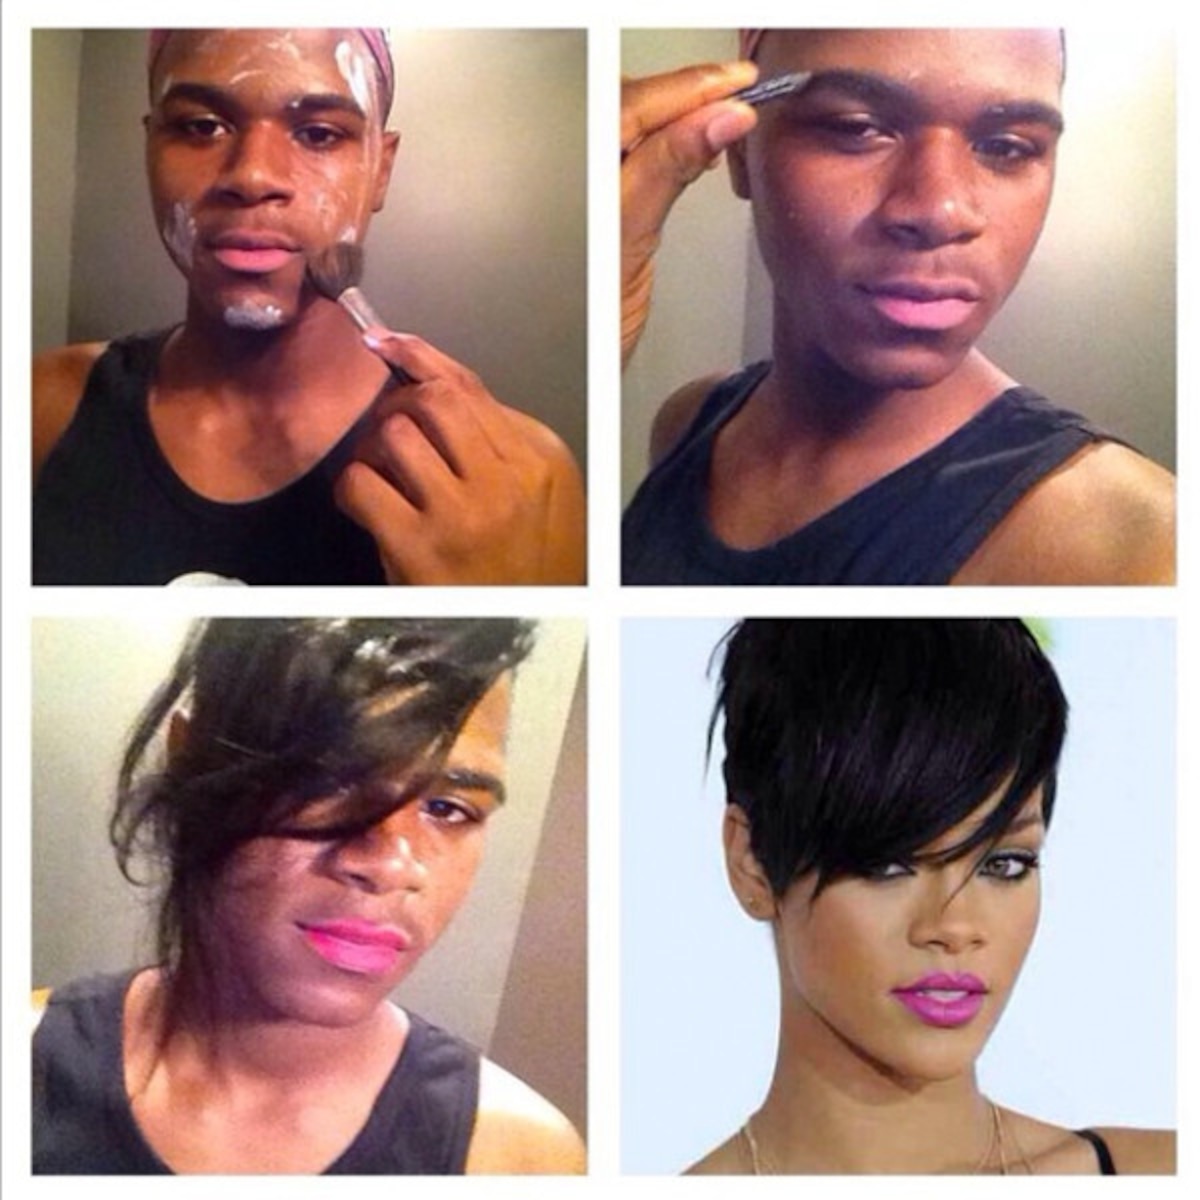 MakeupTransformation is a Funny Thing Happening Right Now - E! Online